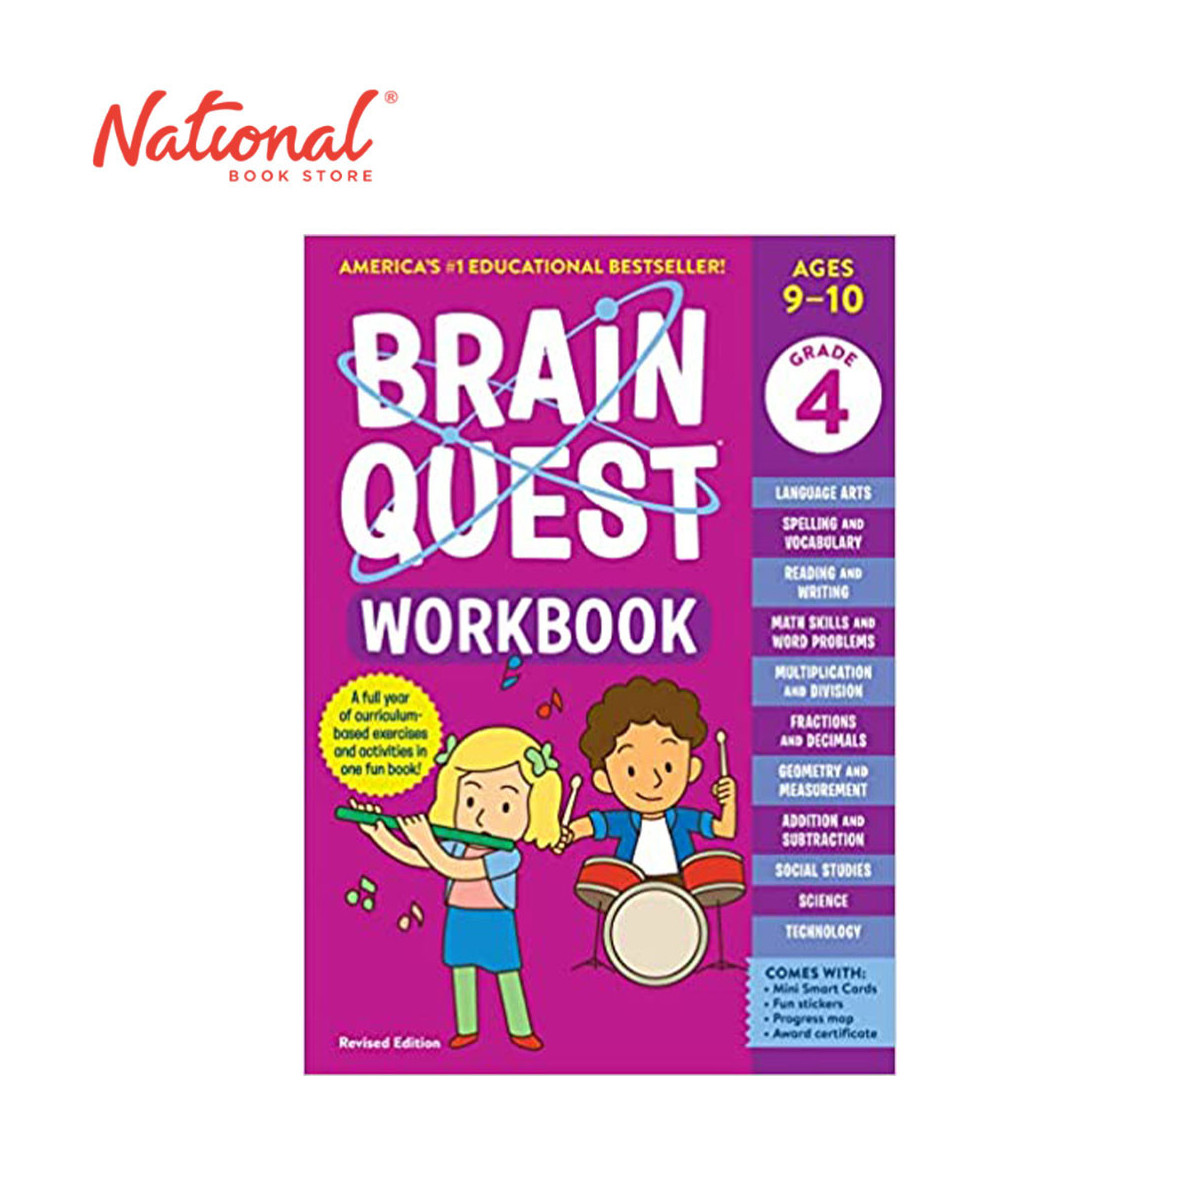 Brain Quest Workbook: 4th Grade Revised Edition - Trade Paperback - Activity Books for Kids